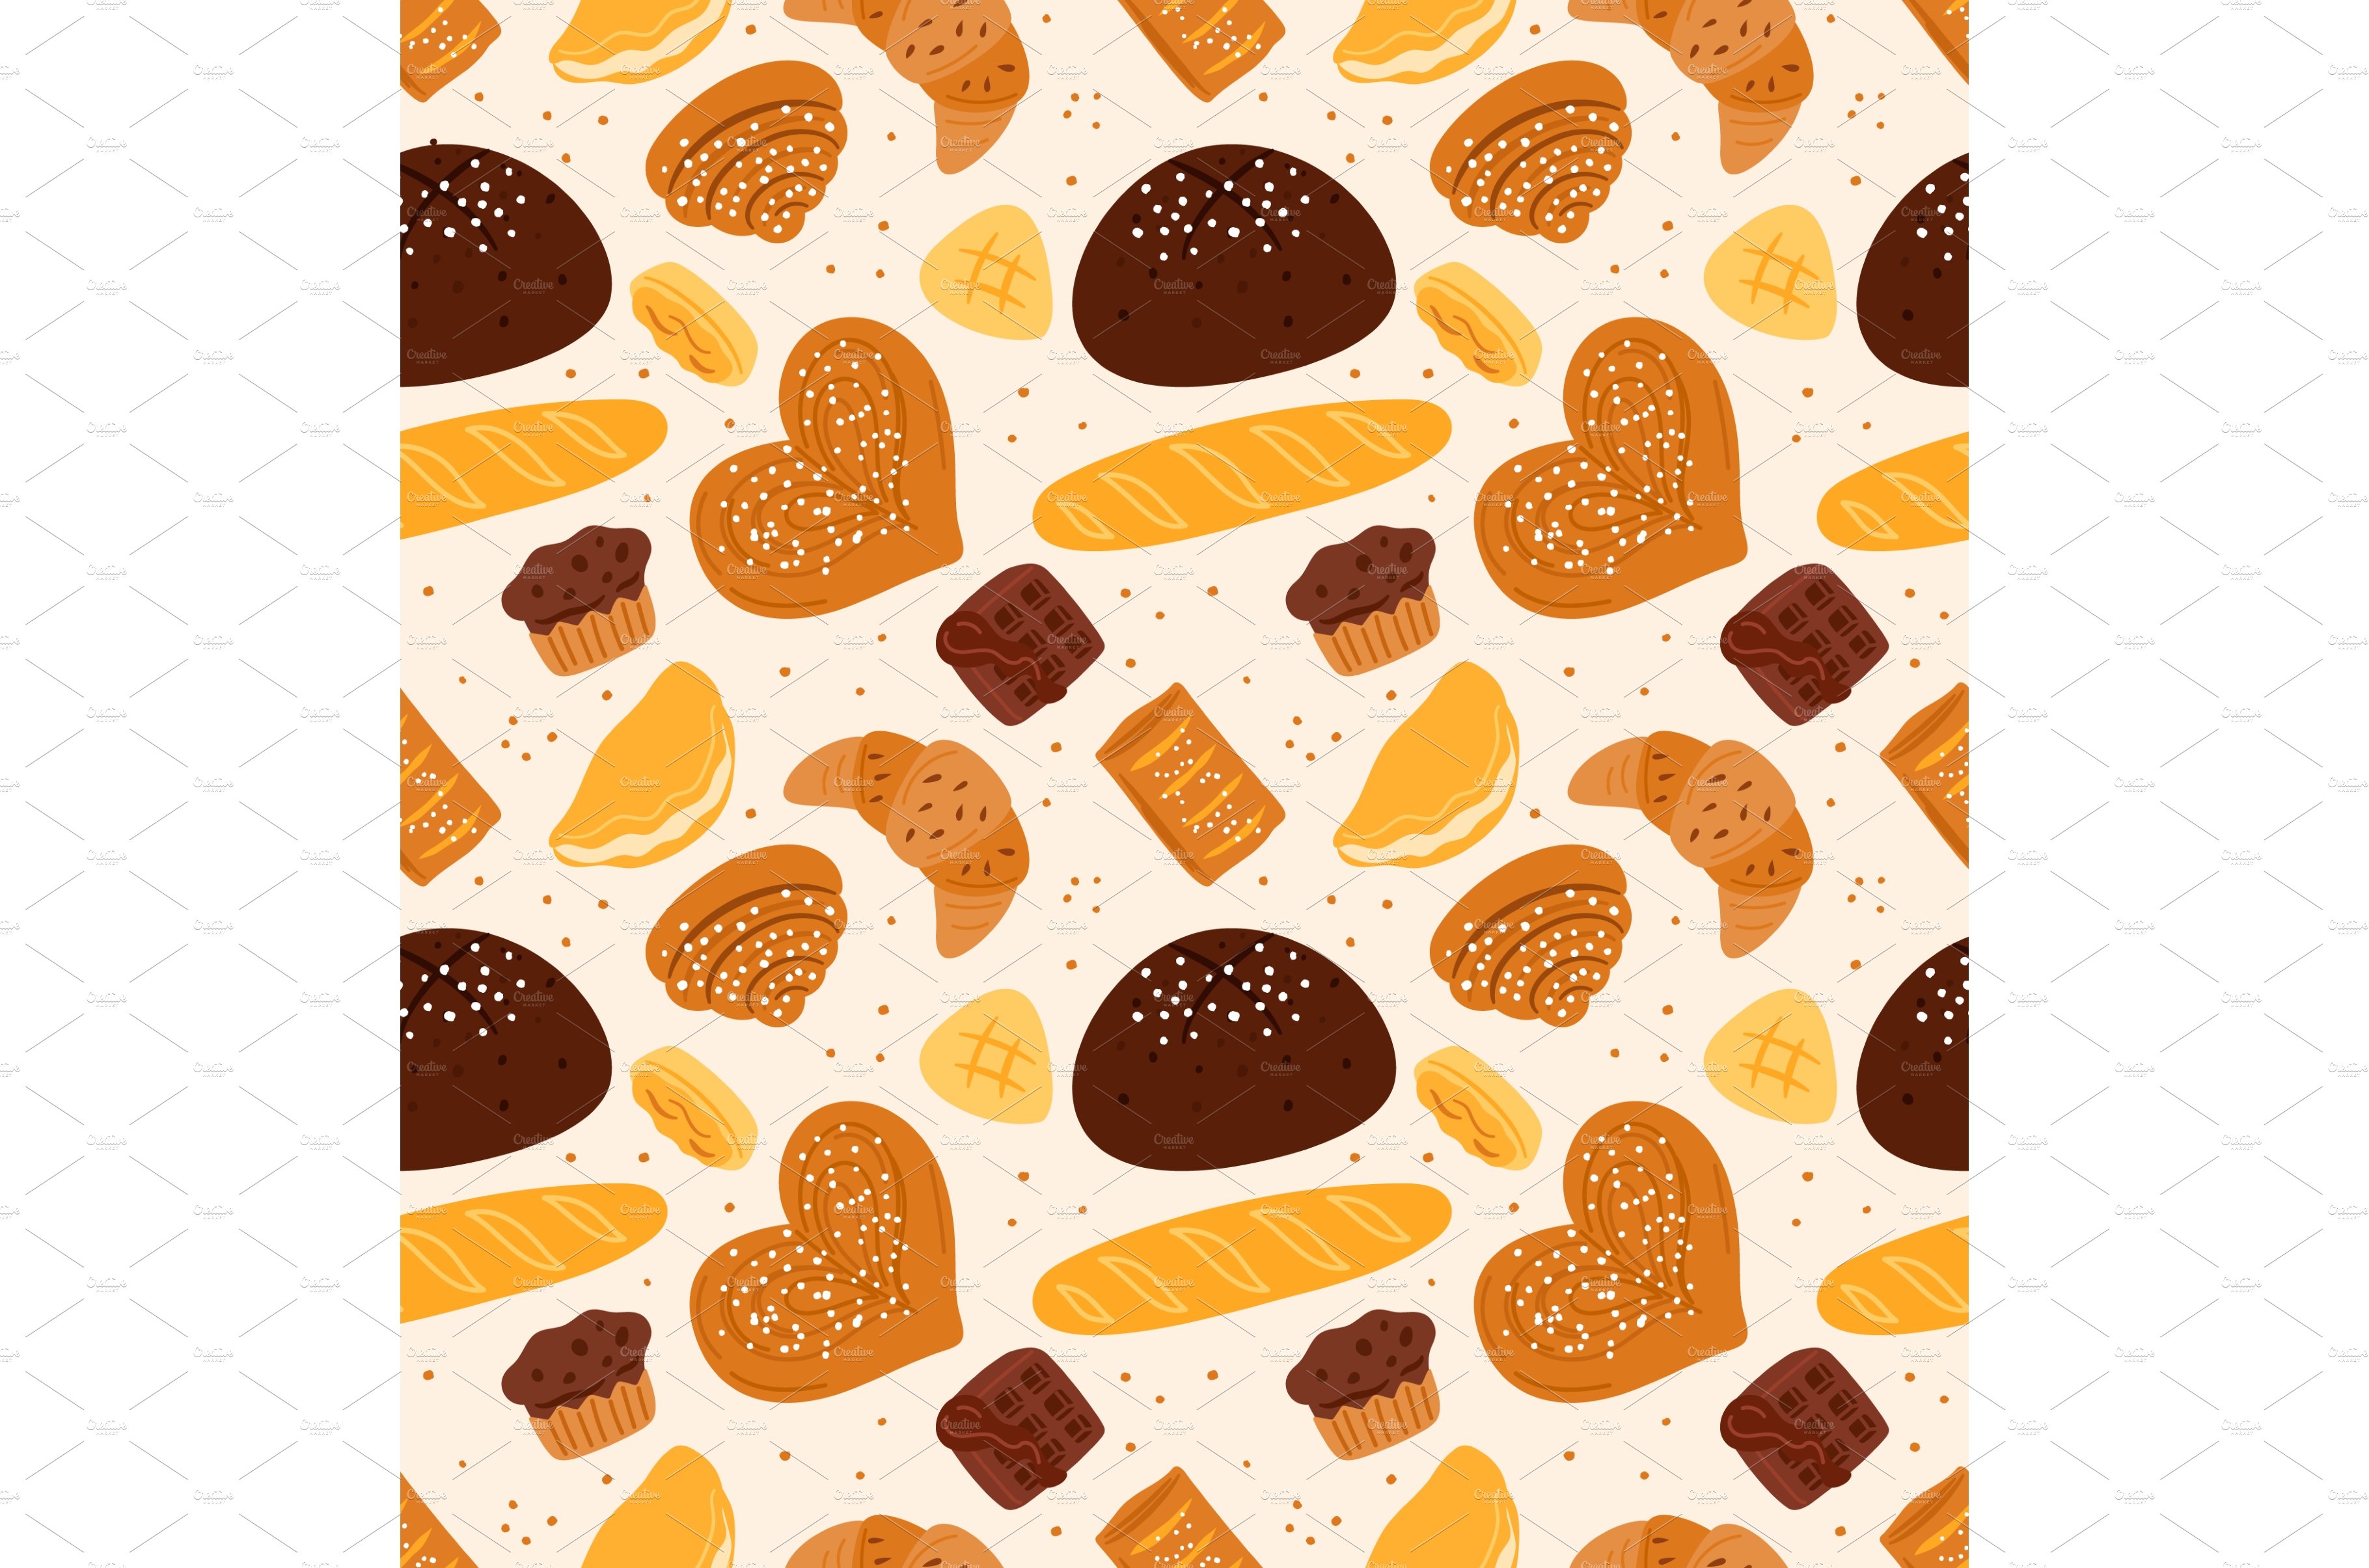 Bread products seamless pattern cover image.